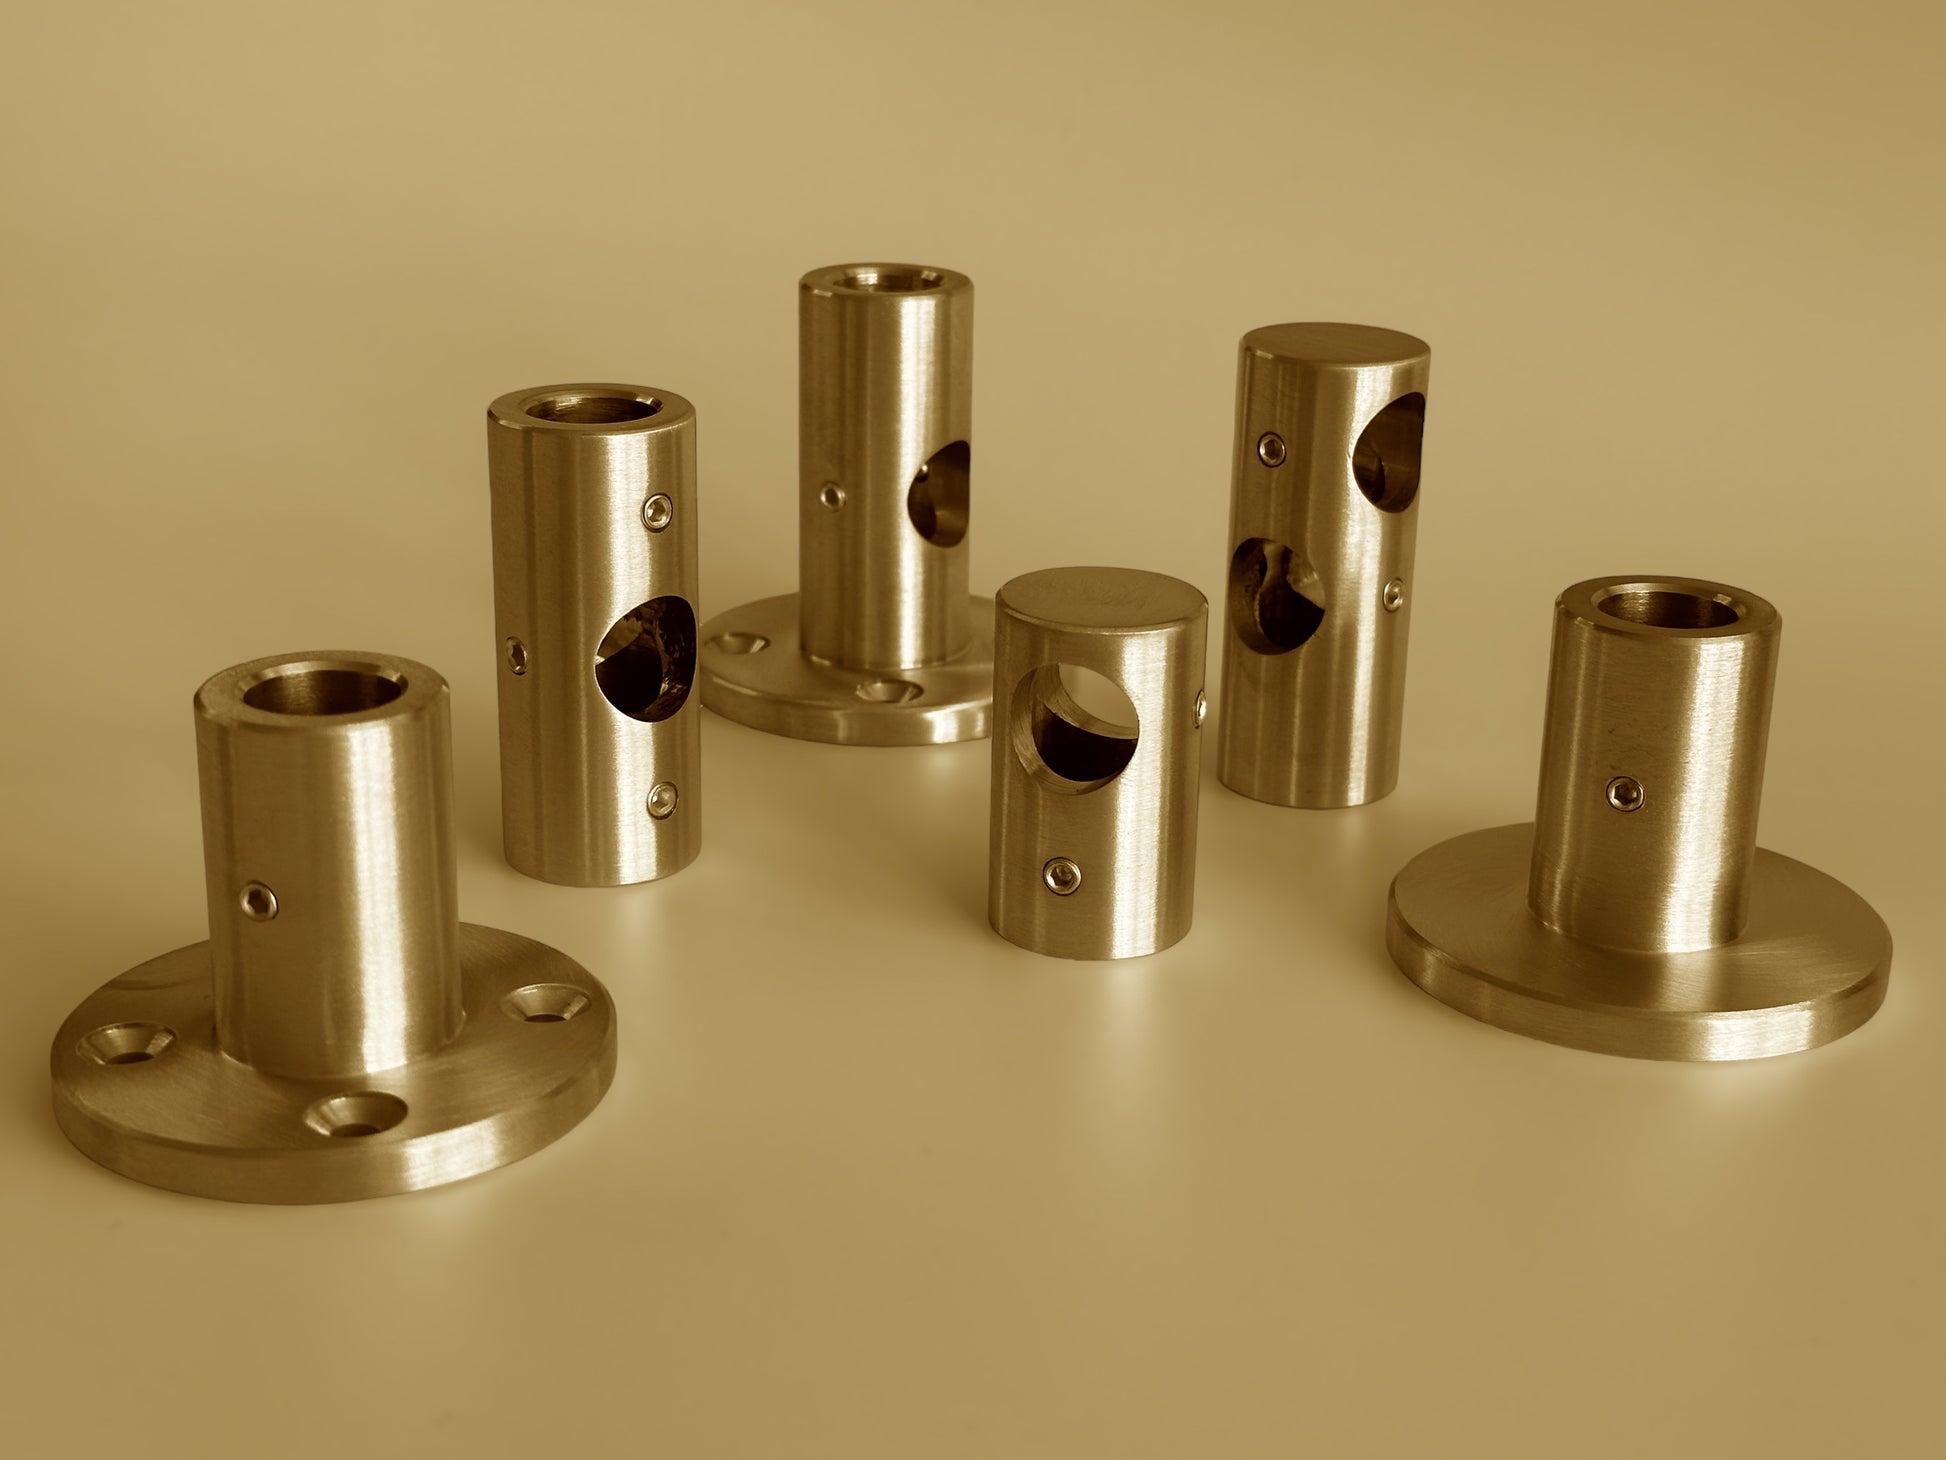 Type A brass fitting set – a key component for your unique brass shelving project.